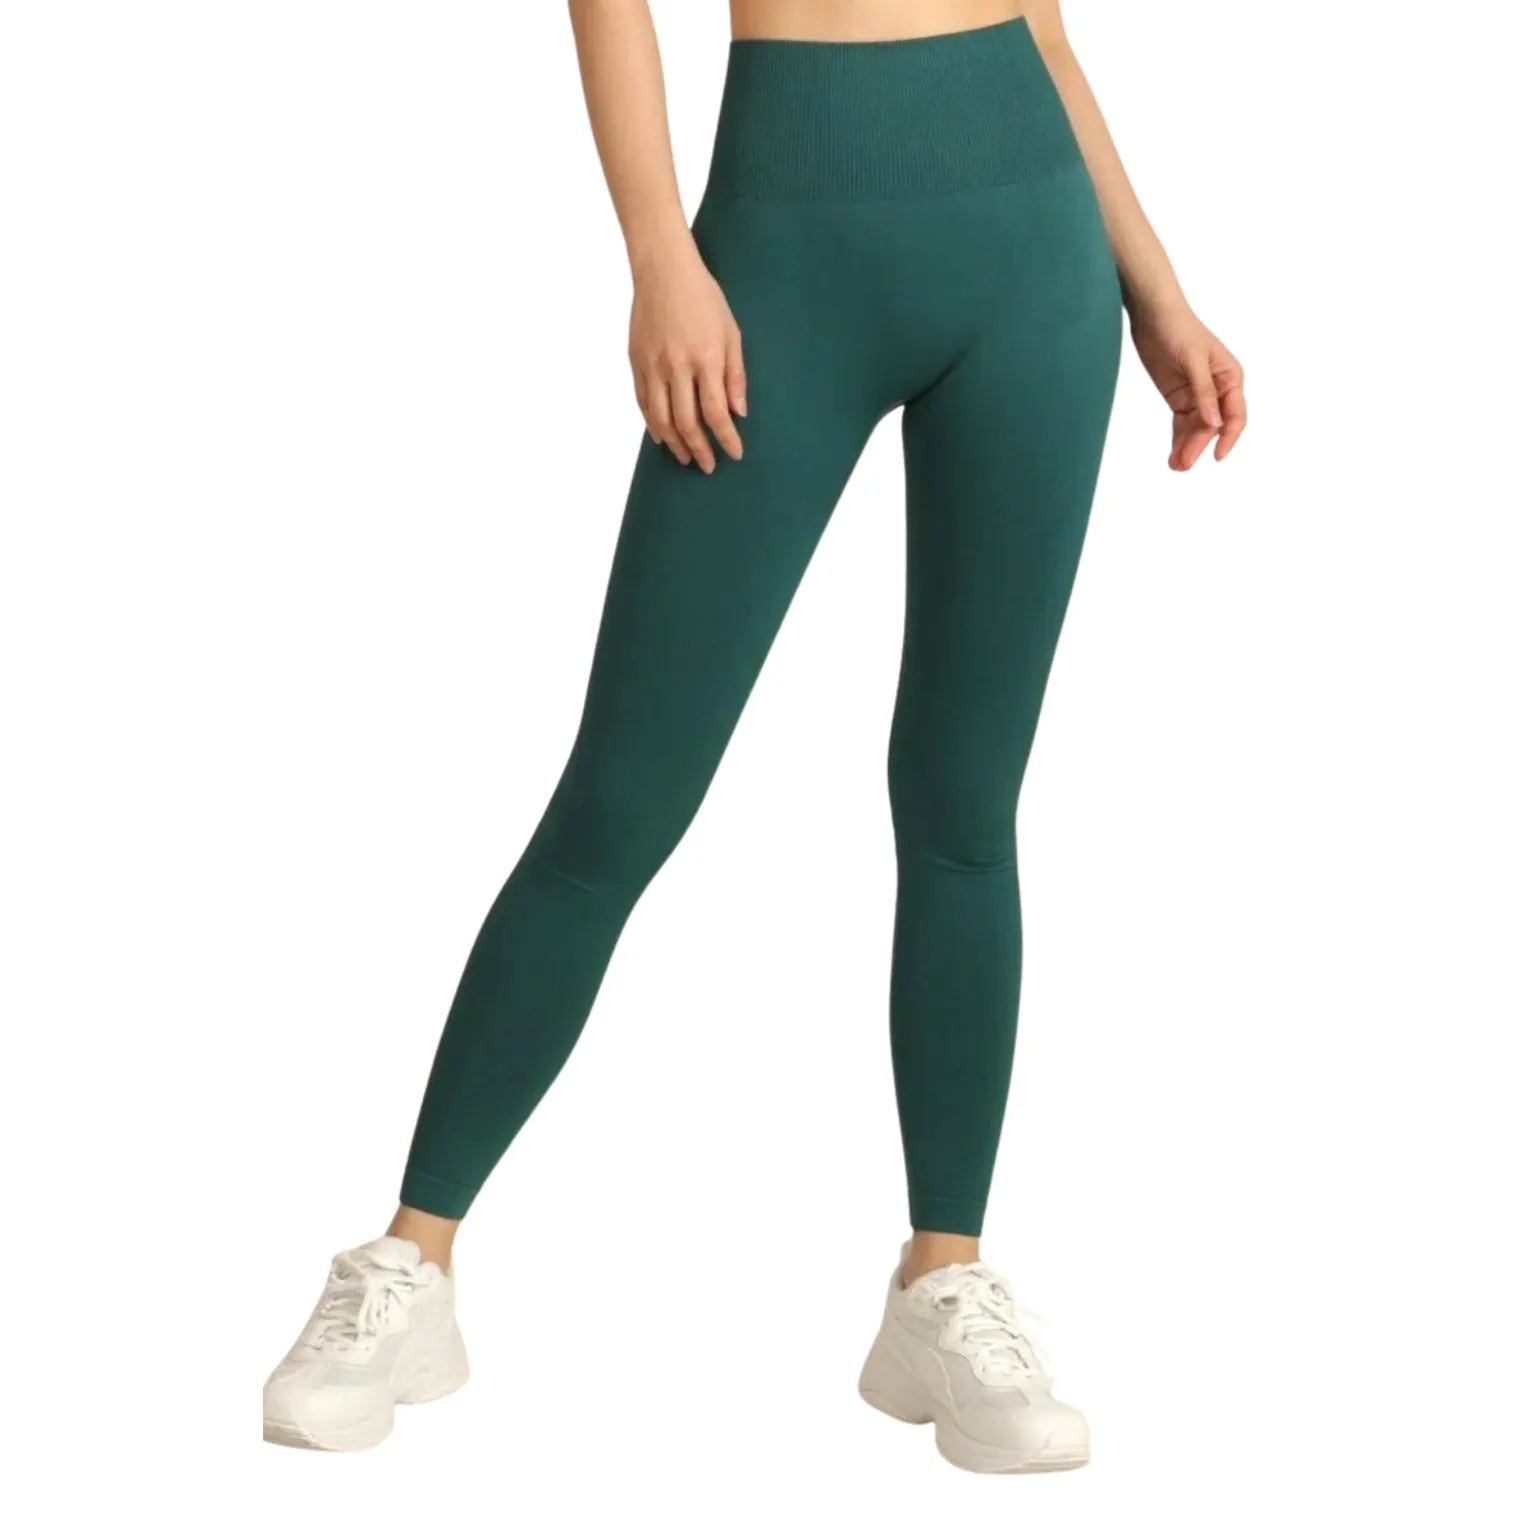 Gym Leggings manufacturing with trendy design